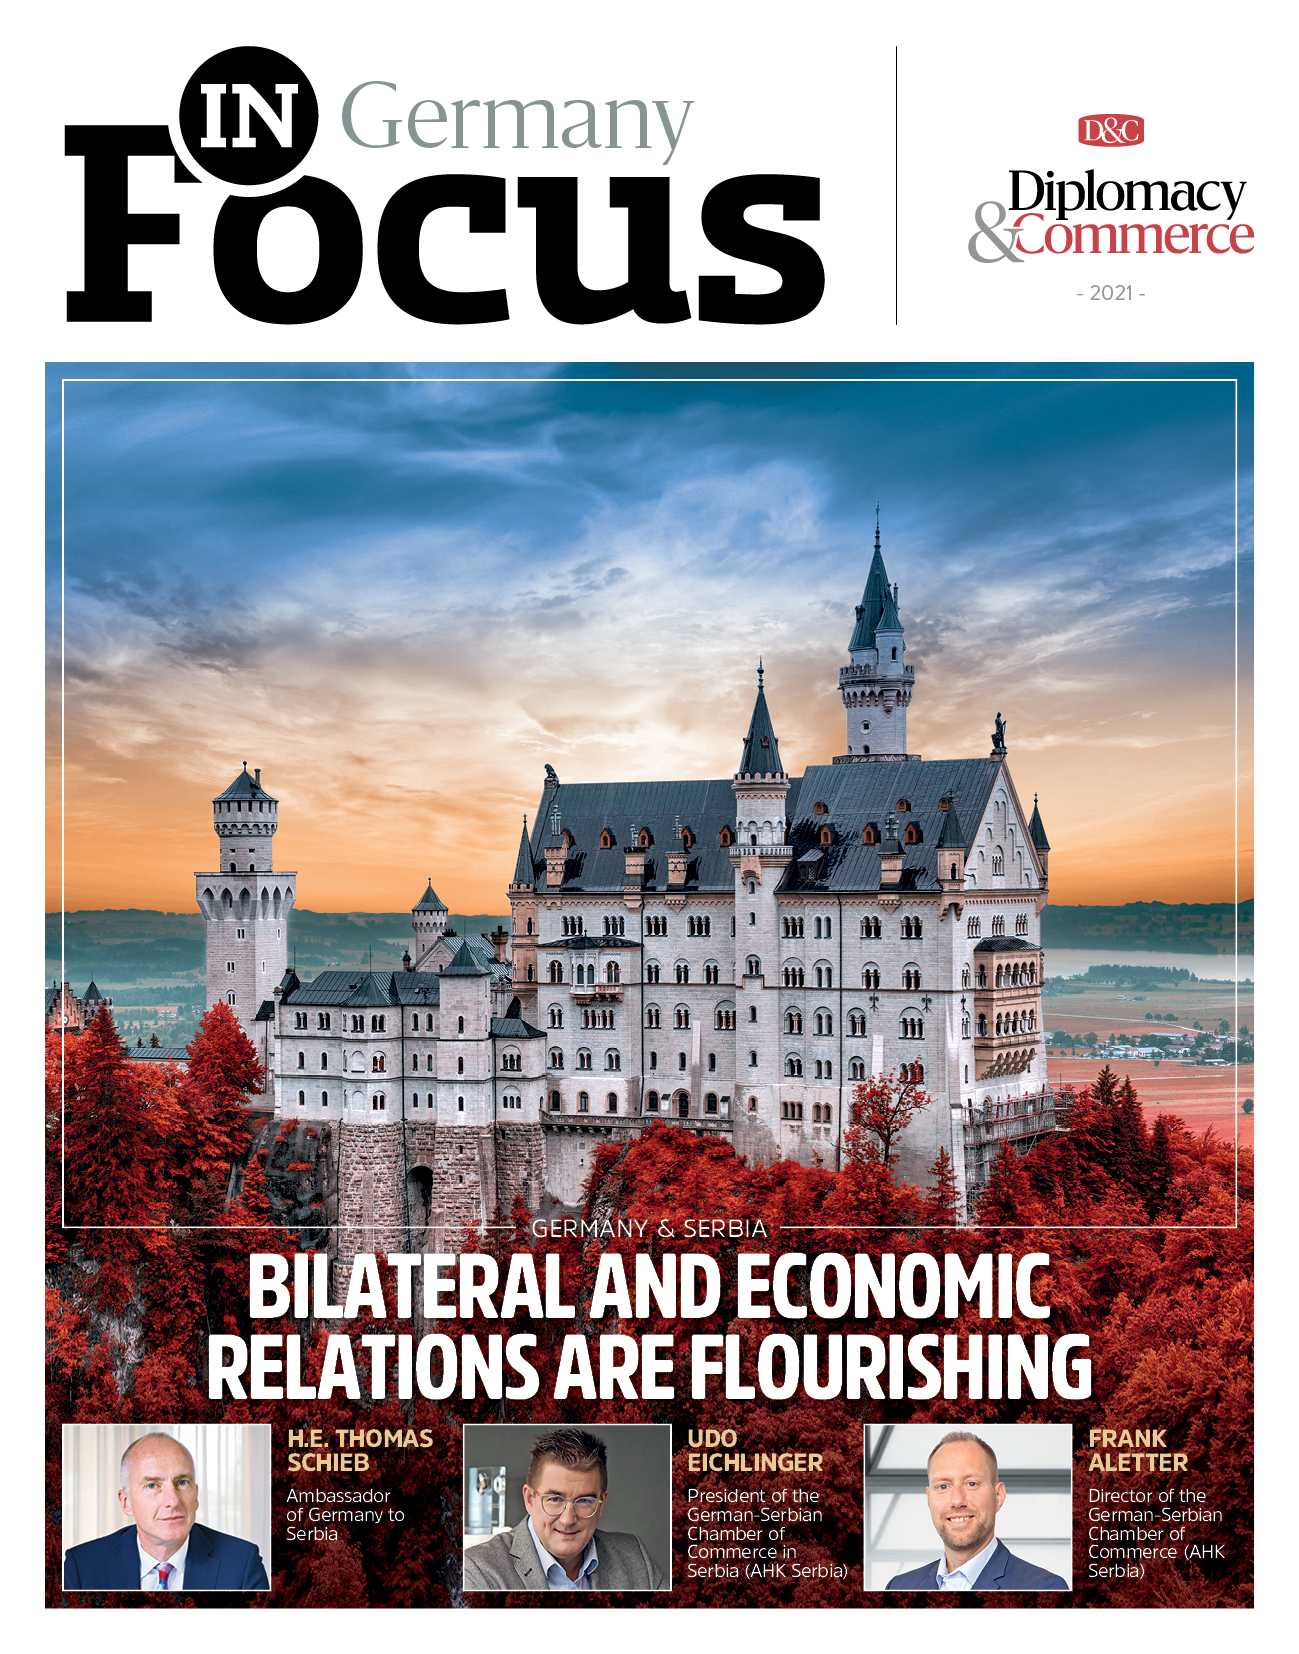 DandC - diplomacy and commerce - In Focus - Germany - 2021